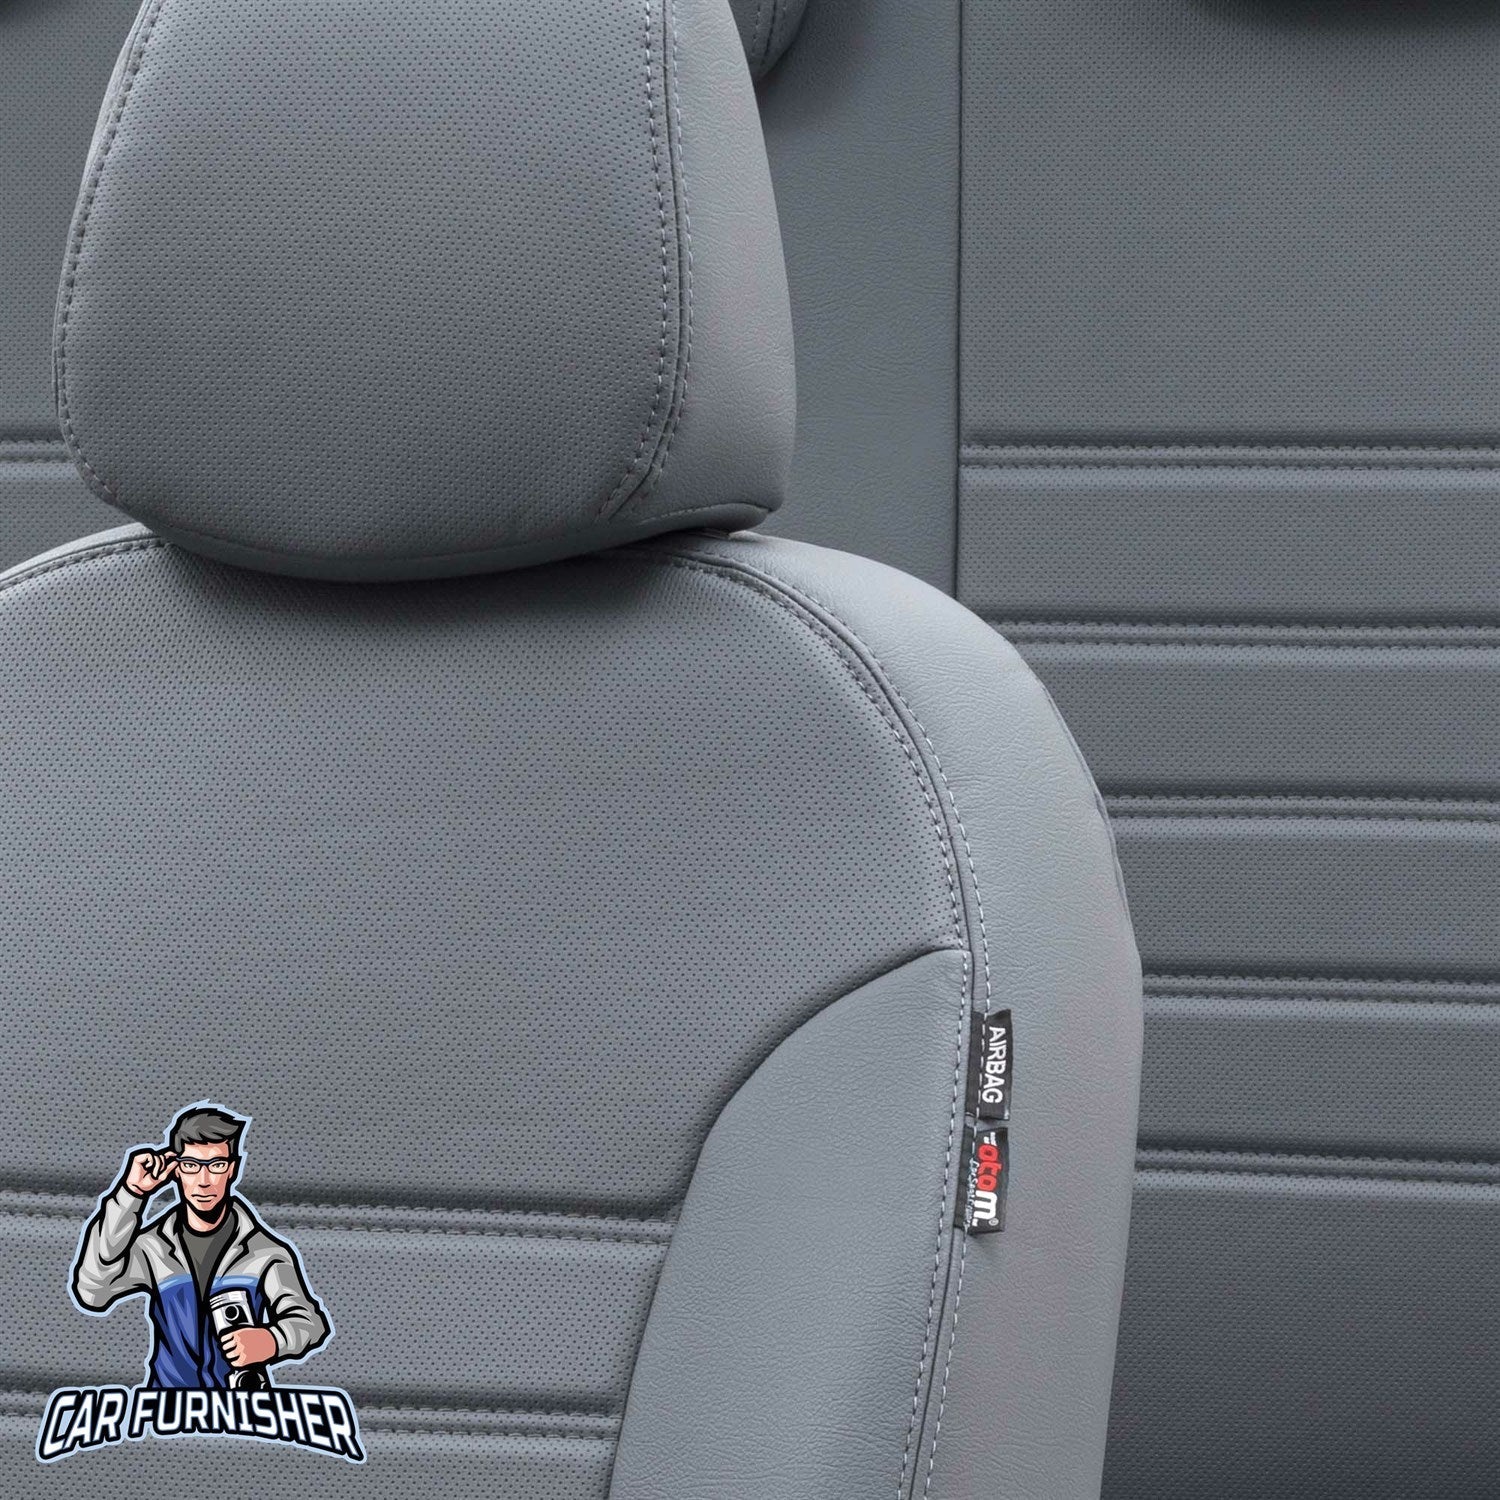 Ford Transit Seat Covers Istanbul Leather Design Smoked Leather